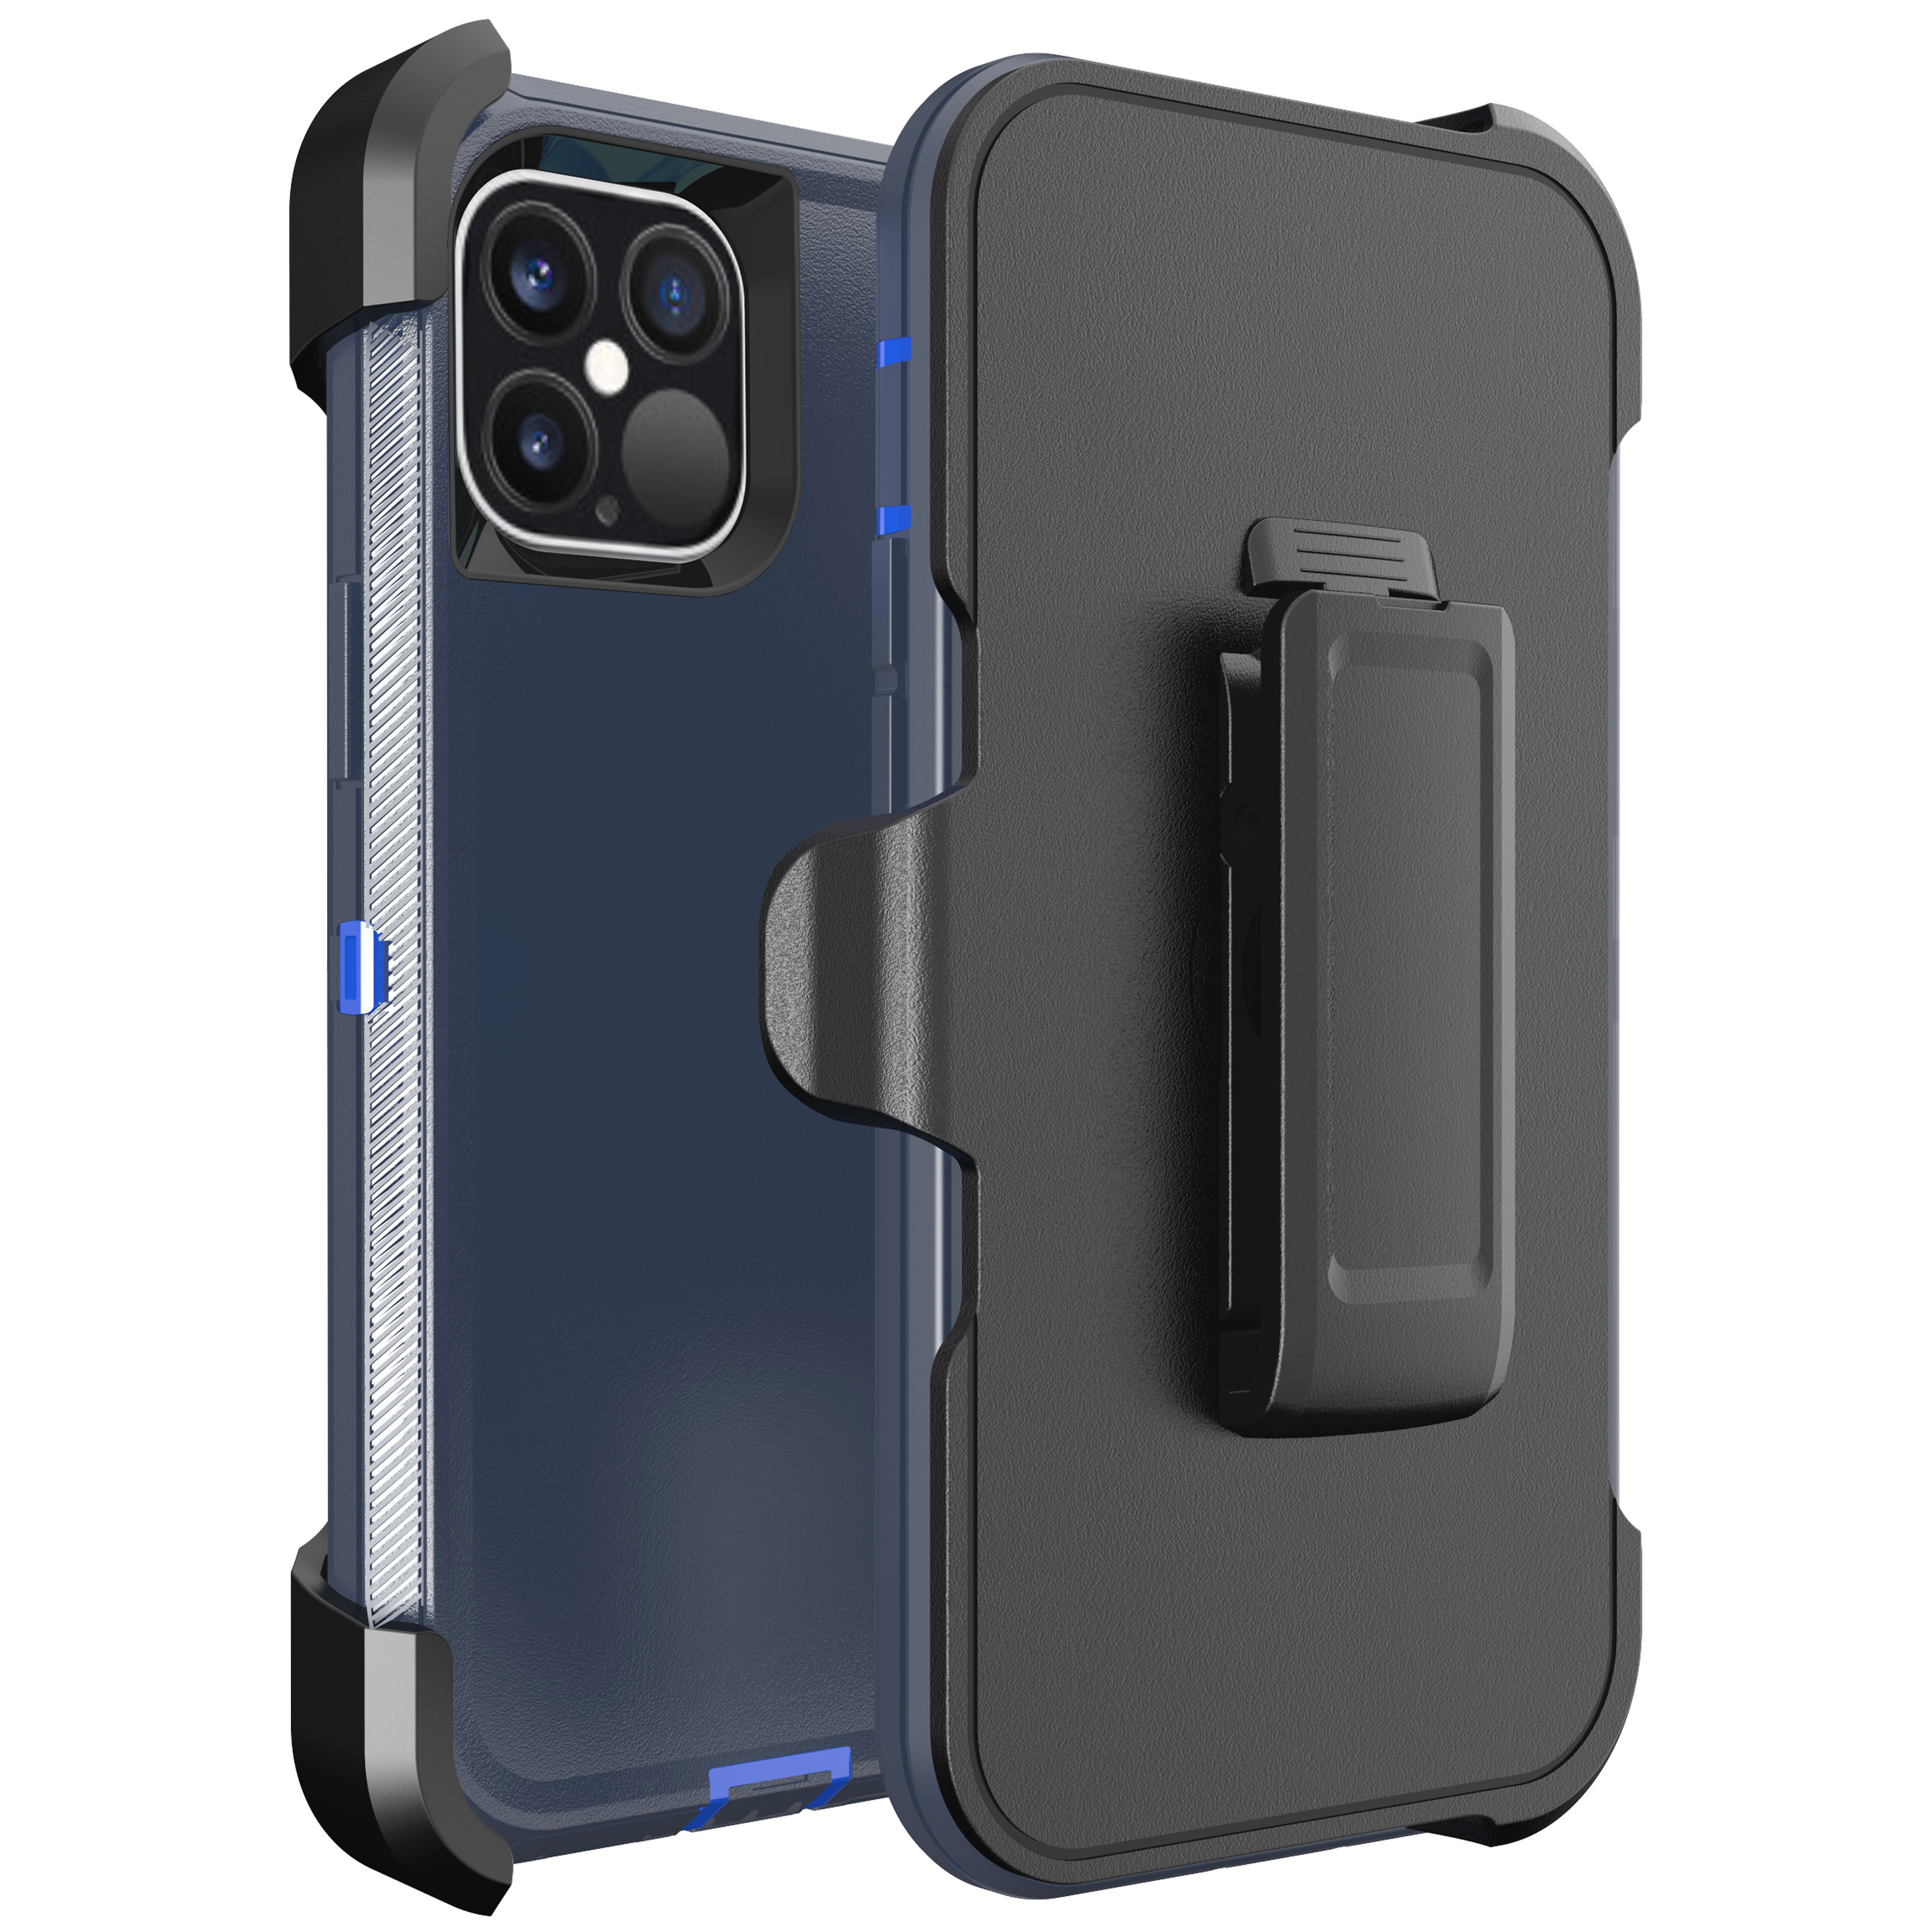 Armor Robot Case With Clip for iPHONE 12 Mini 5.4 (Navy Blue - Black)